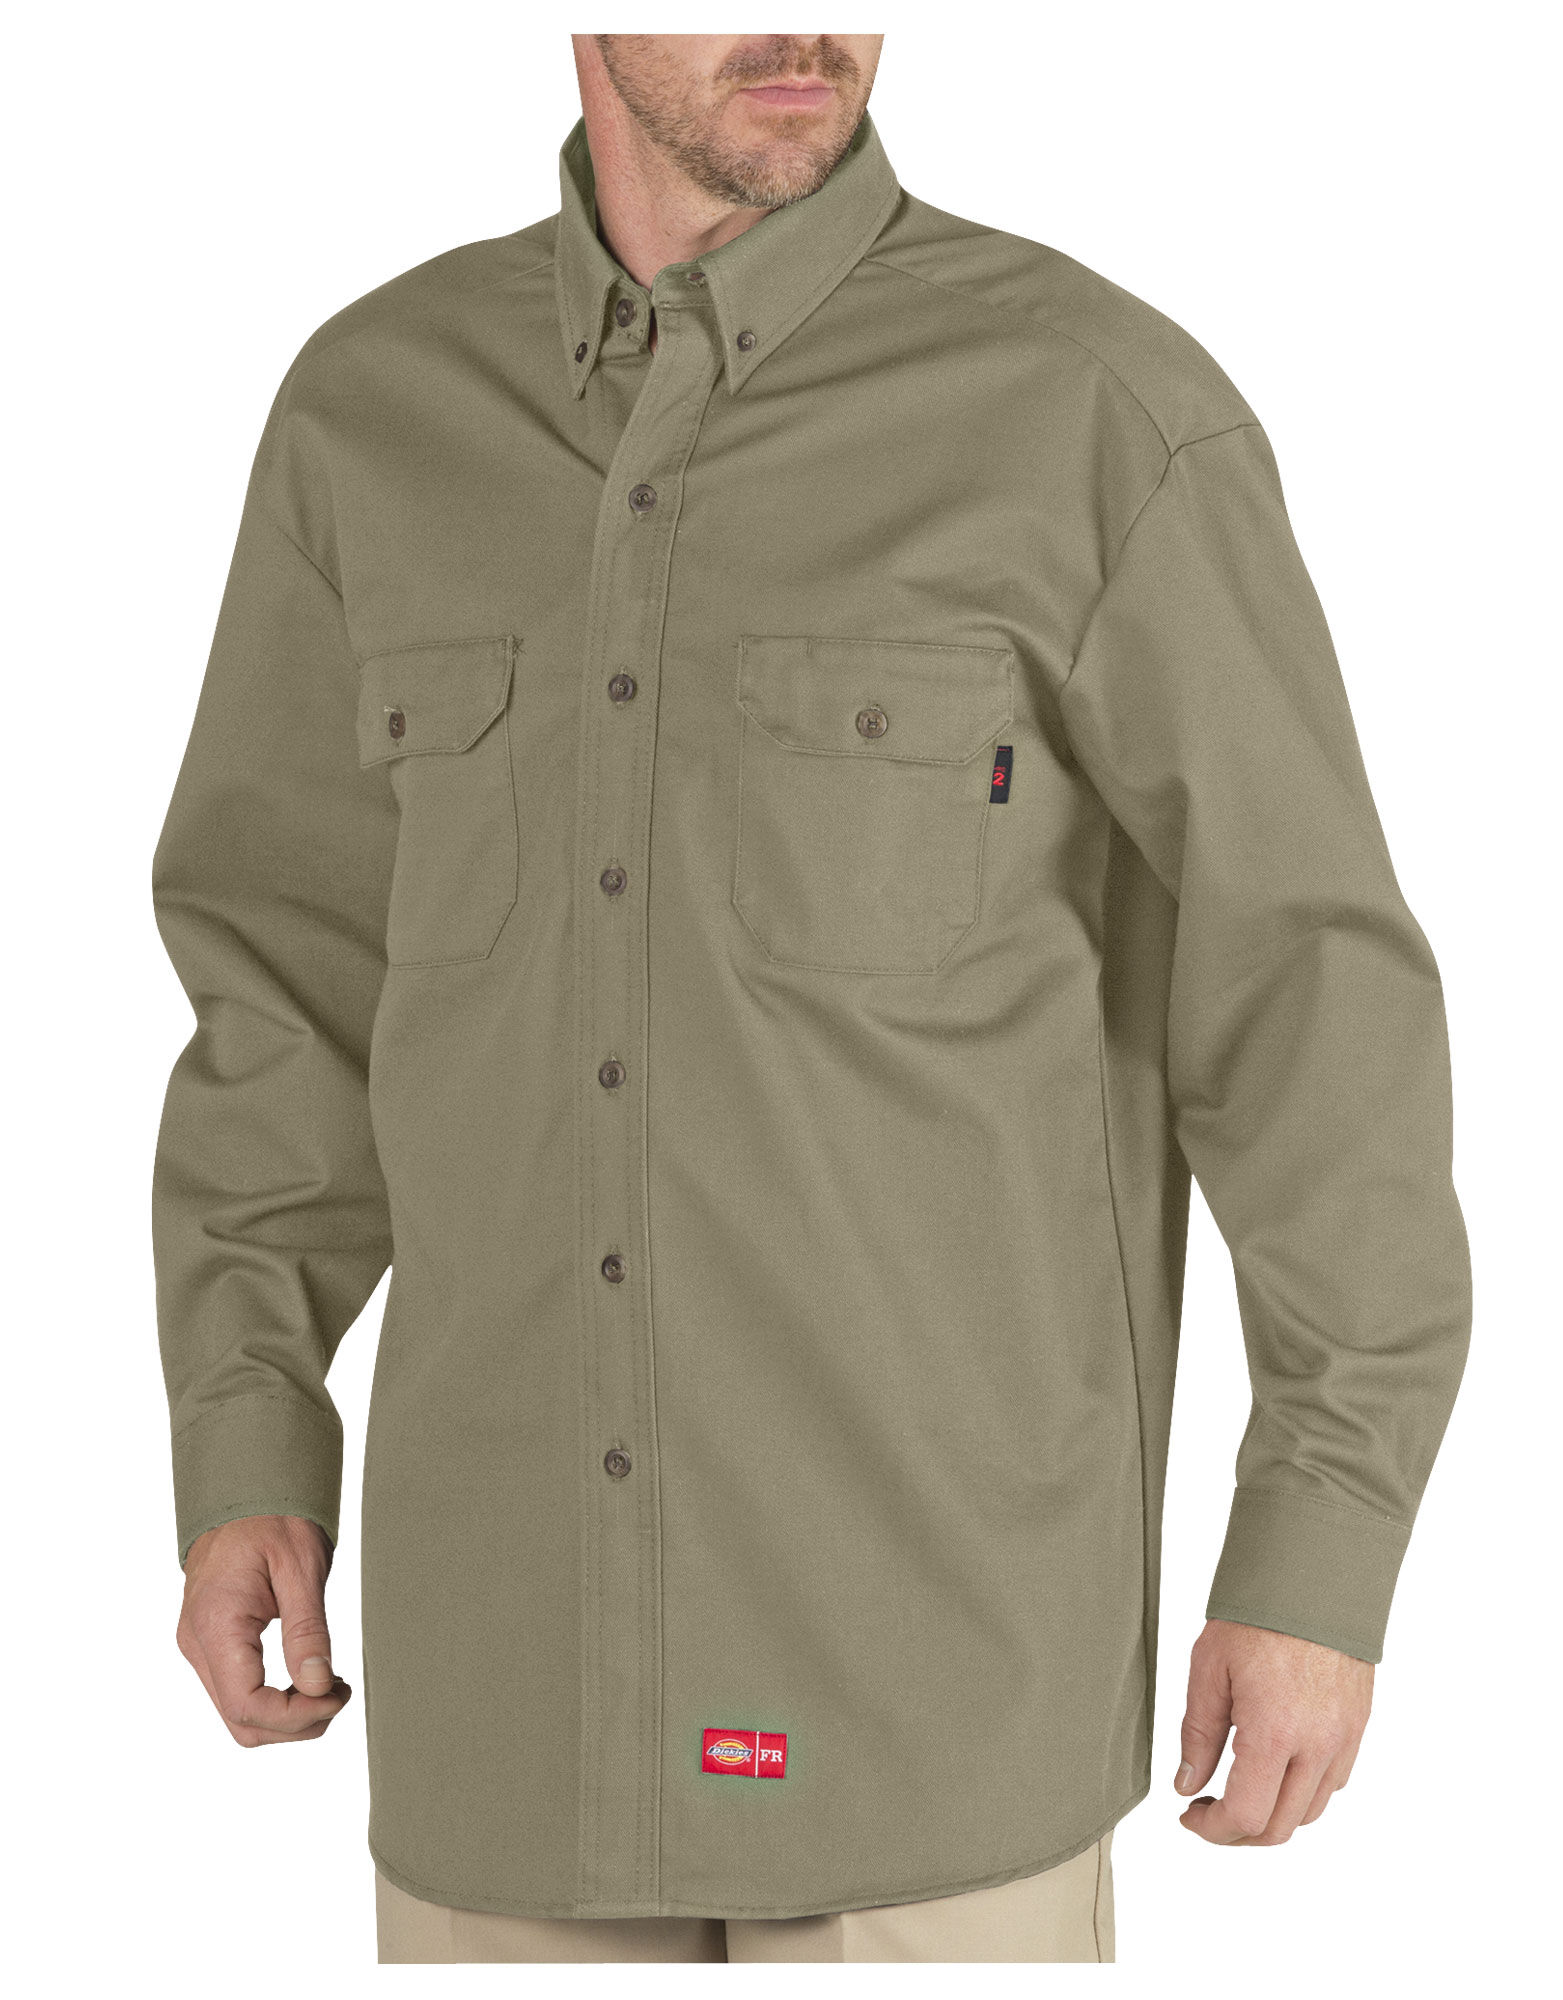 long sleeve button up shirts